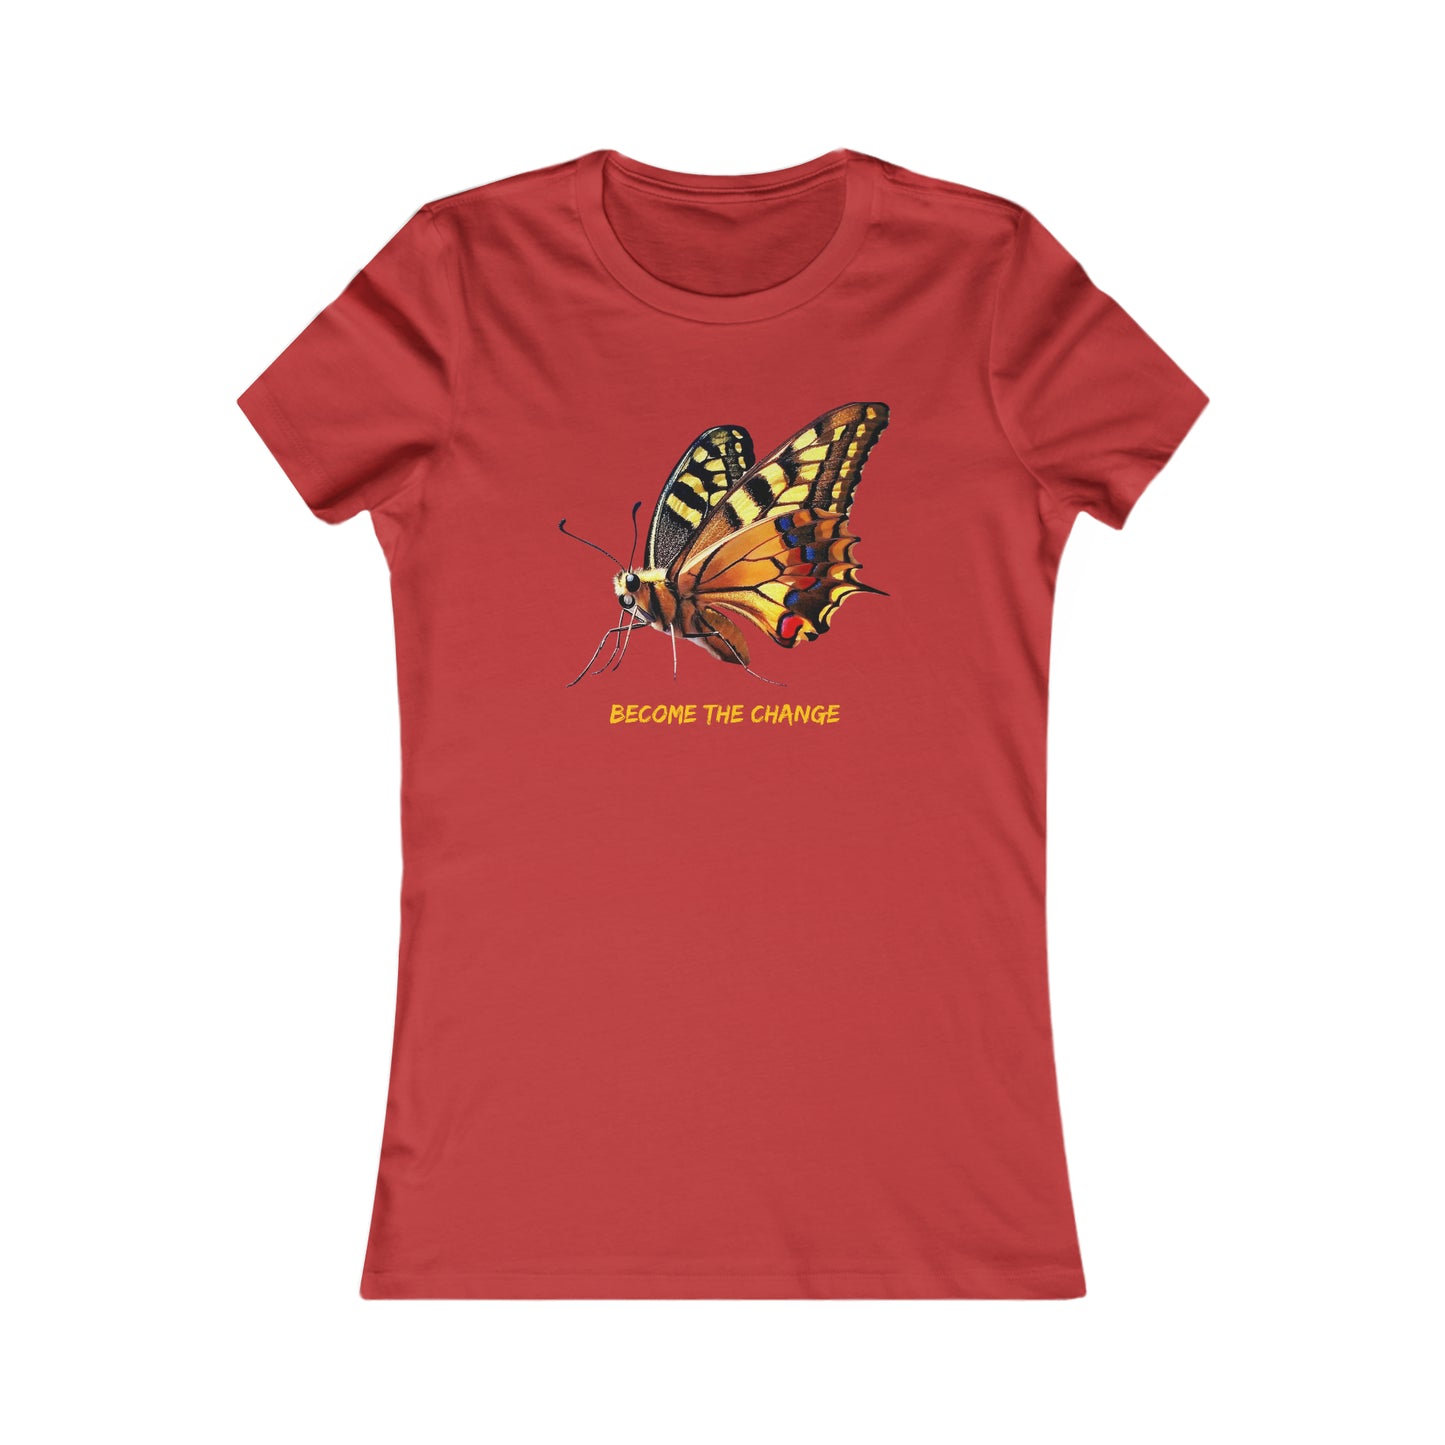 A beautiful butterfly with “BECOME THE CHANGE” message in the center of this Women's Favorite Tee design. Slim fit so please check the size table.